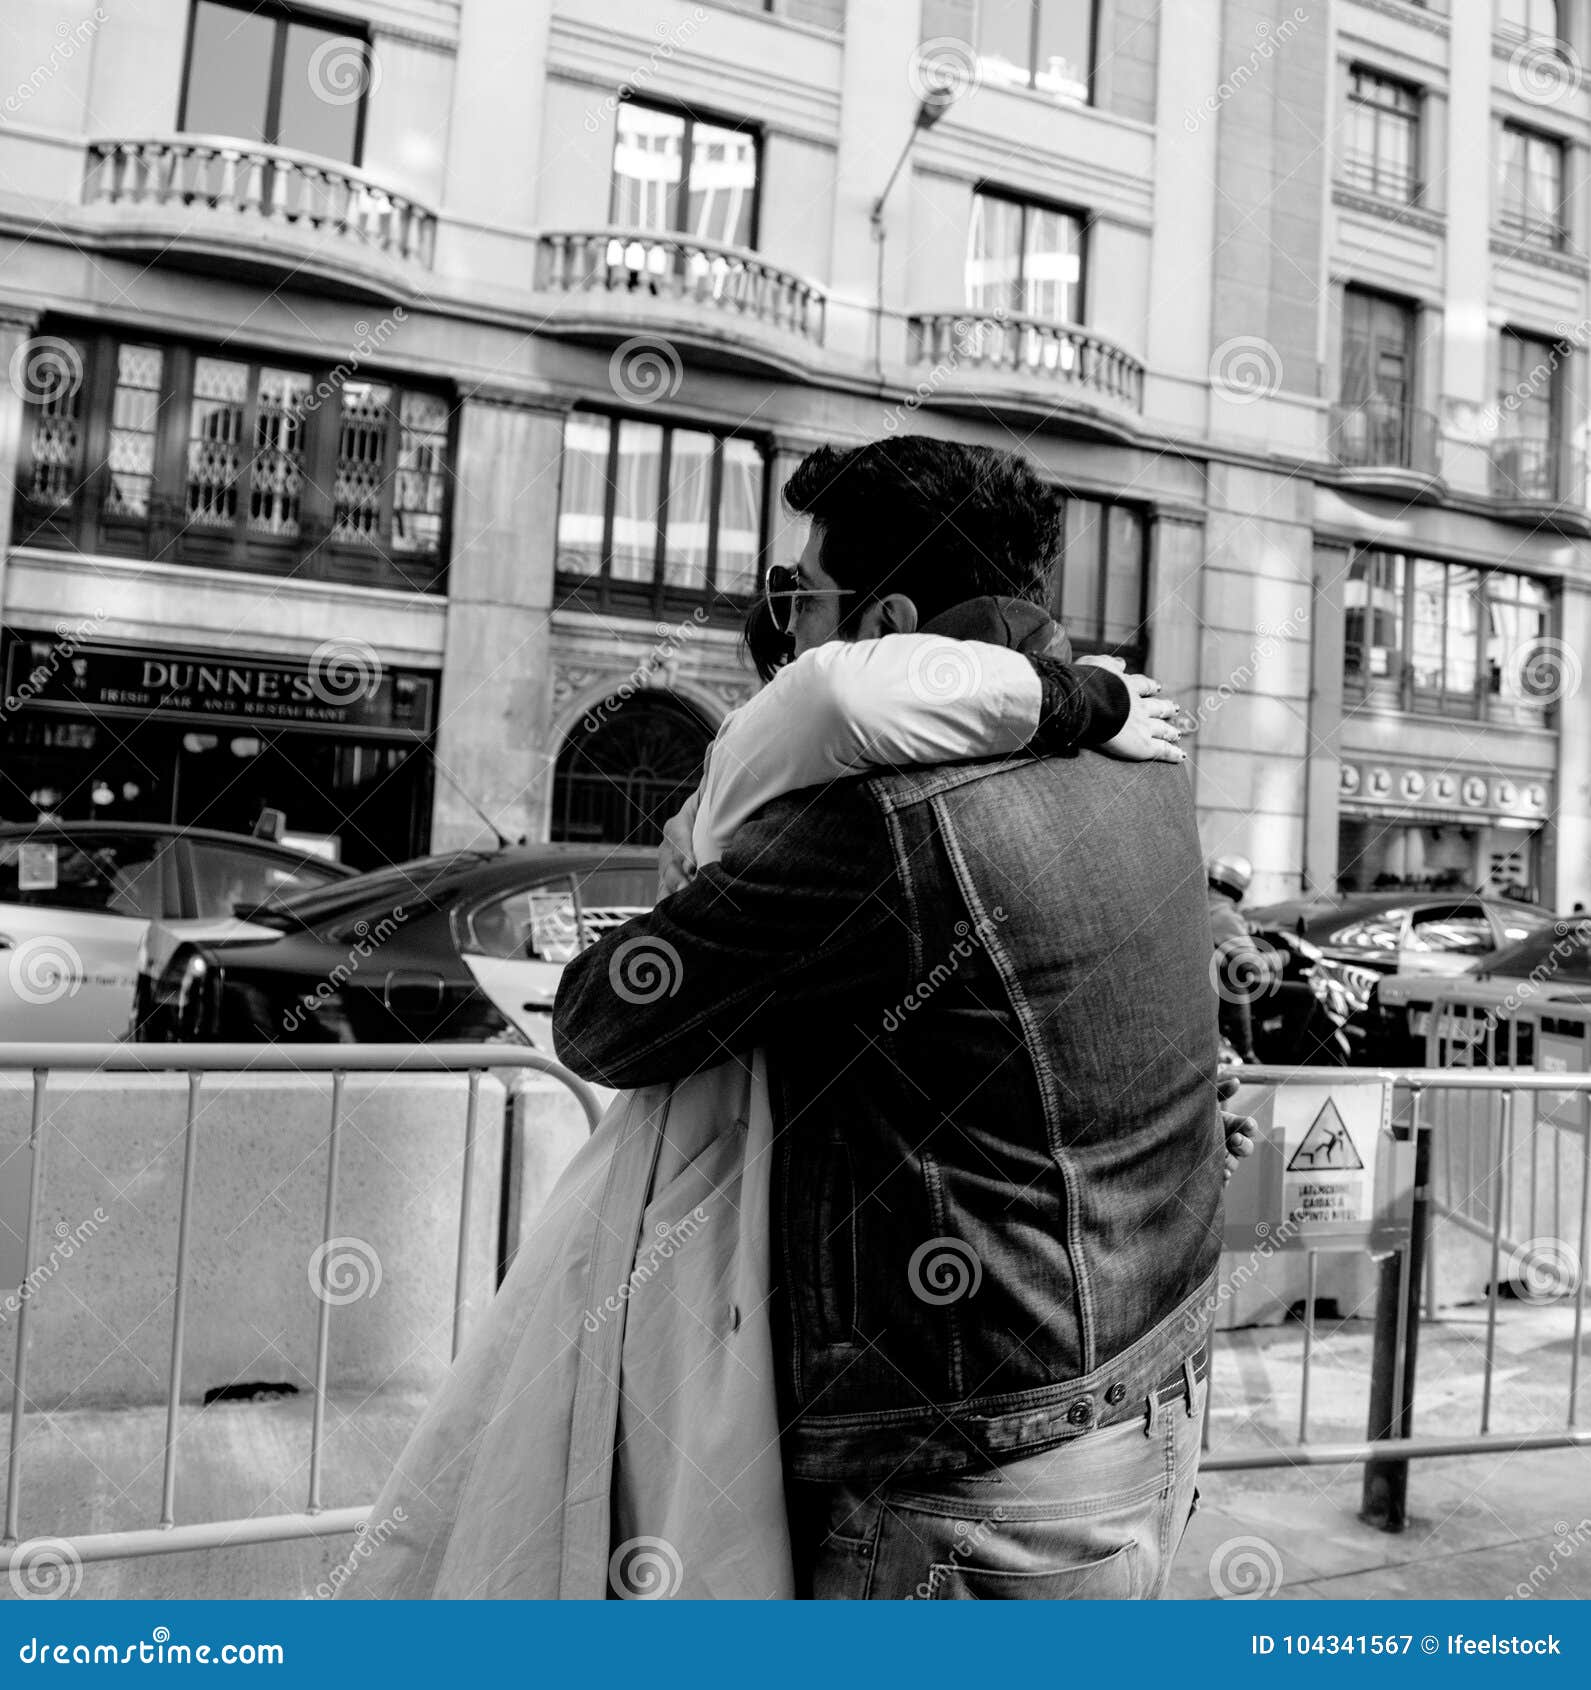 Couple In Love Of Spanish Teens Hugging Editorial Photography Image Of Caucasian Couple